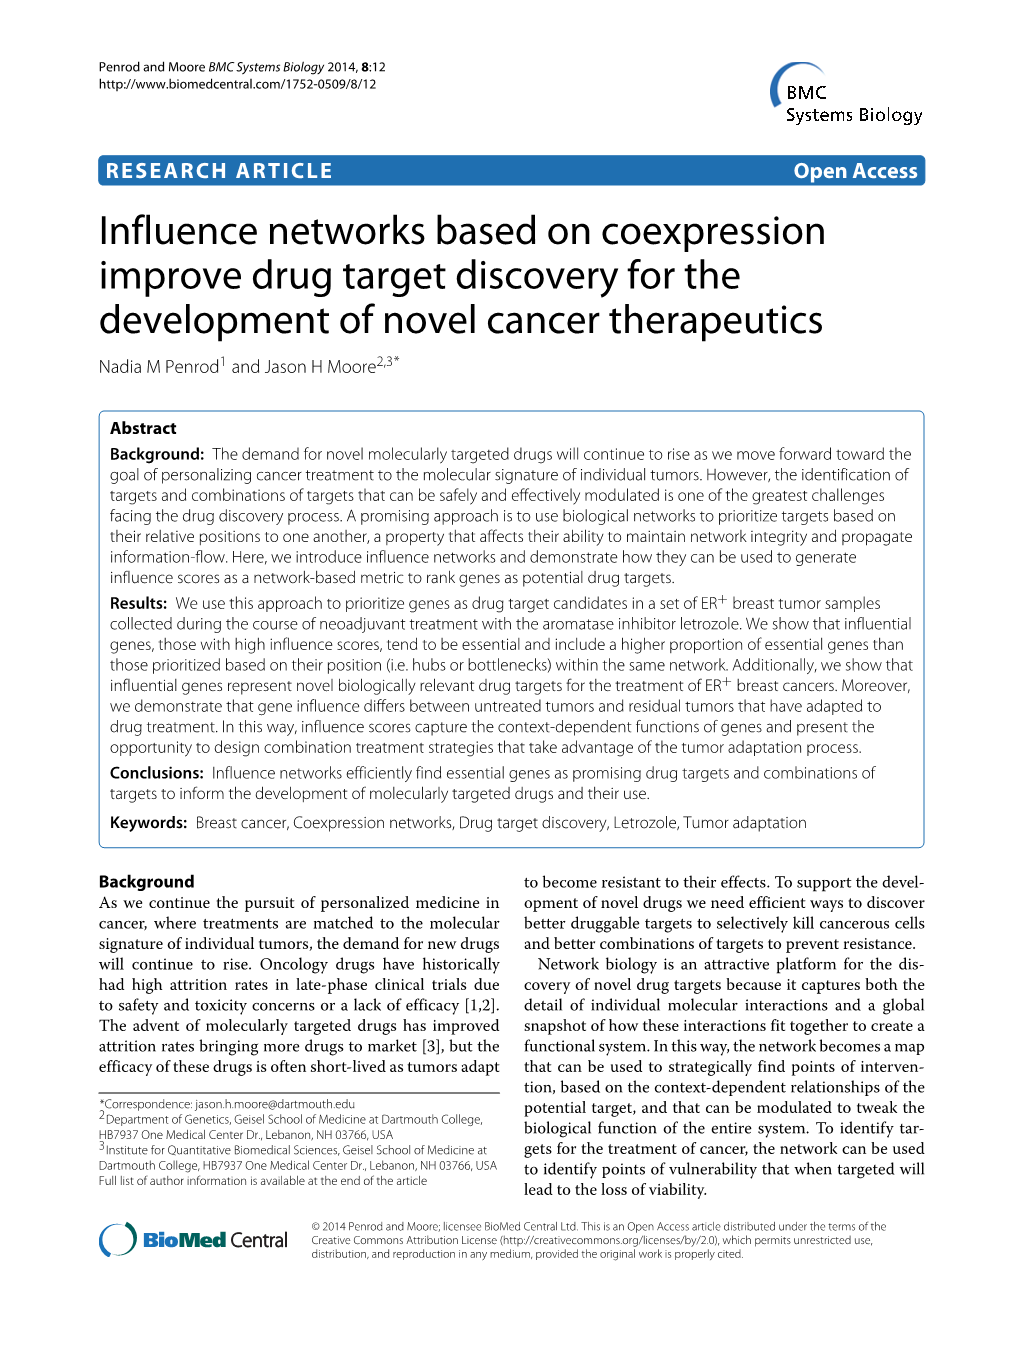 Influence Networks Based on Coexpression Improve Drug Target Discovery for the Development of Novel Cancer Therapeutics Nadia M Penrod1 and Jason H Moore2,3*